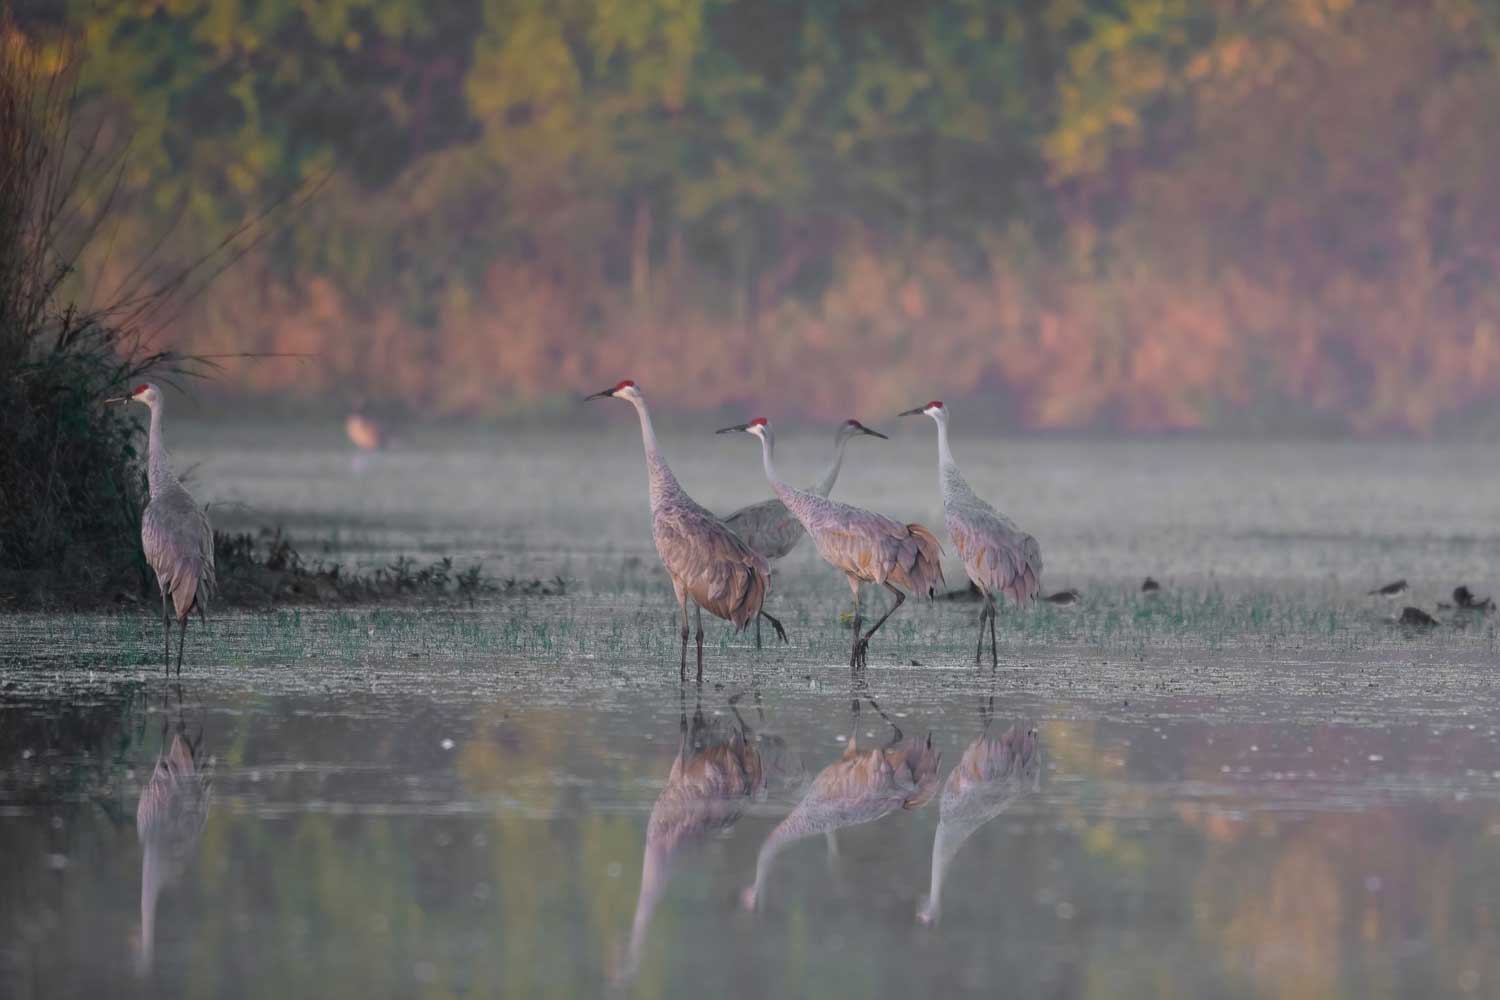 A group of five sandhill cranes standing in calm, shallow water.